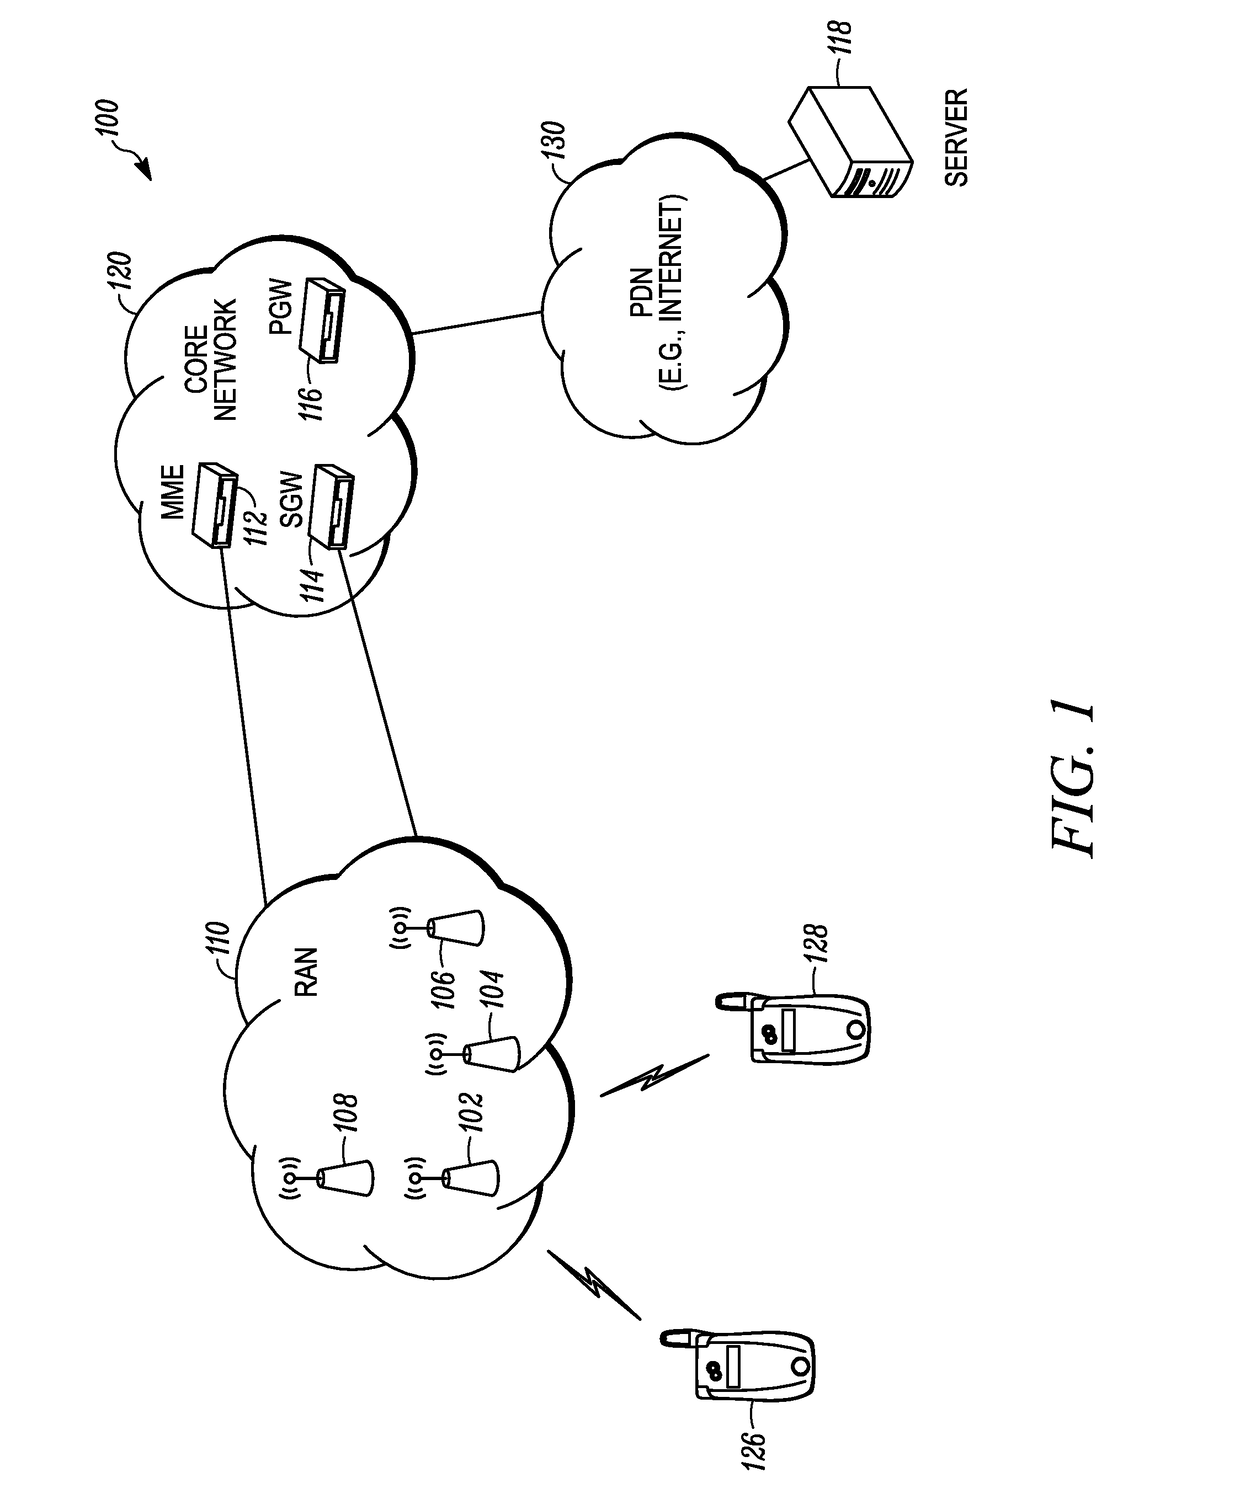 Methods, Devices, and Systems for Discontinuous Reception for a Shortened Transmission Time Interval and Processing Time